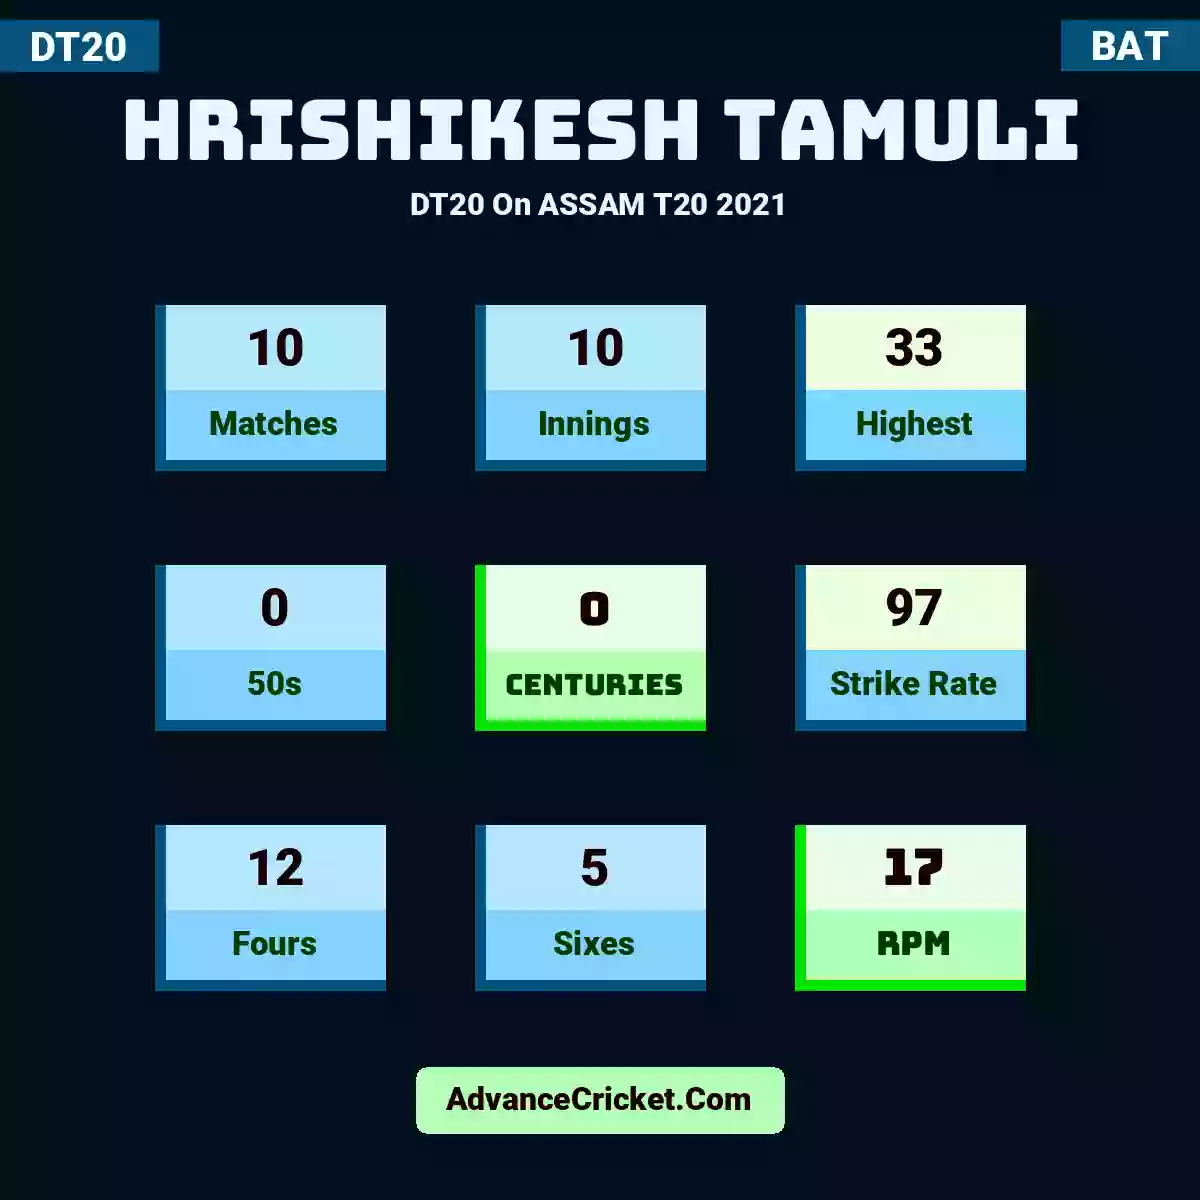 Hrishikesh Tamuli DT20  On ASSAM T20 2021, Hrishikesh Tamuli played 10 matches, scored 33 runs as highest, 0 half-centuries, and 0 centuries, with a strike rate of 97. H.Tamuli hit 12 fours and 5 sixes, with an RPM of 17.